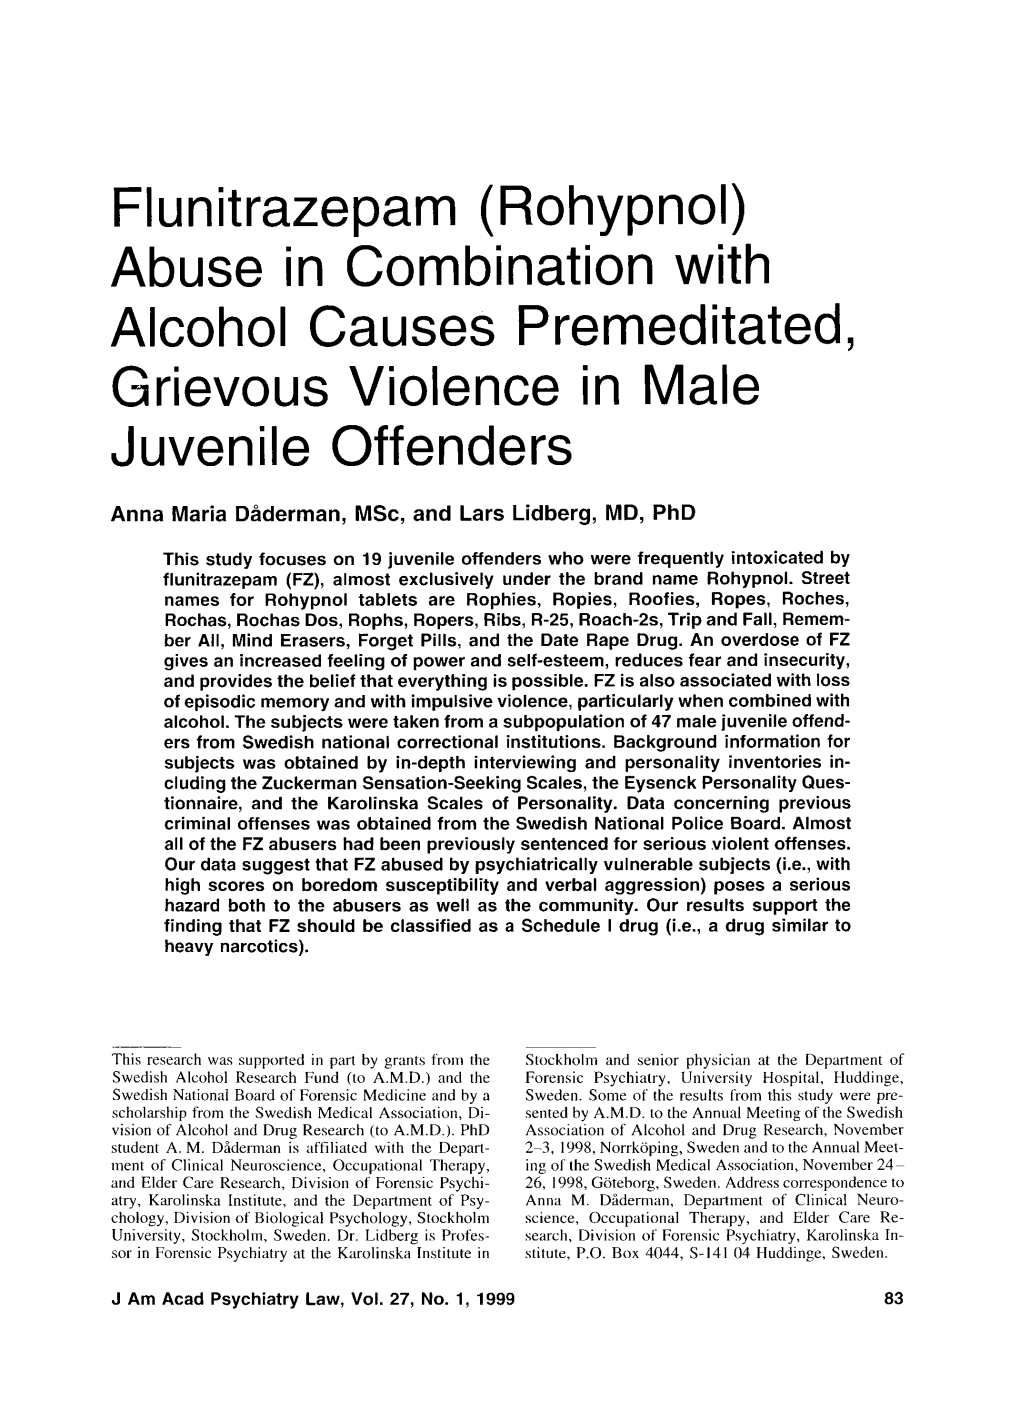 Flunitrazepam (Rohypnol) Abuse in Combination with Alcohol Causes Premeditated, Grievous Violence in Male Juvenile Offenders